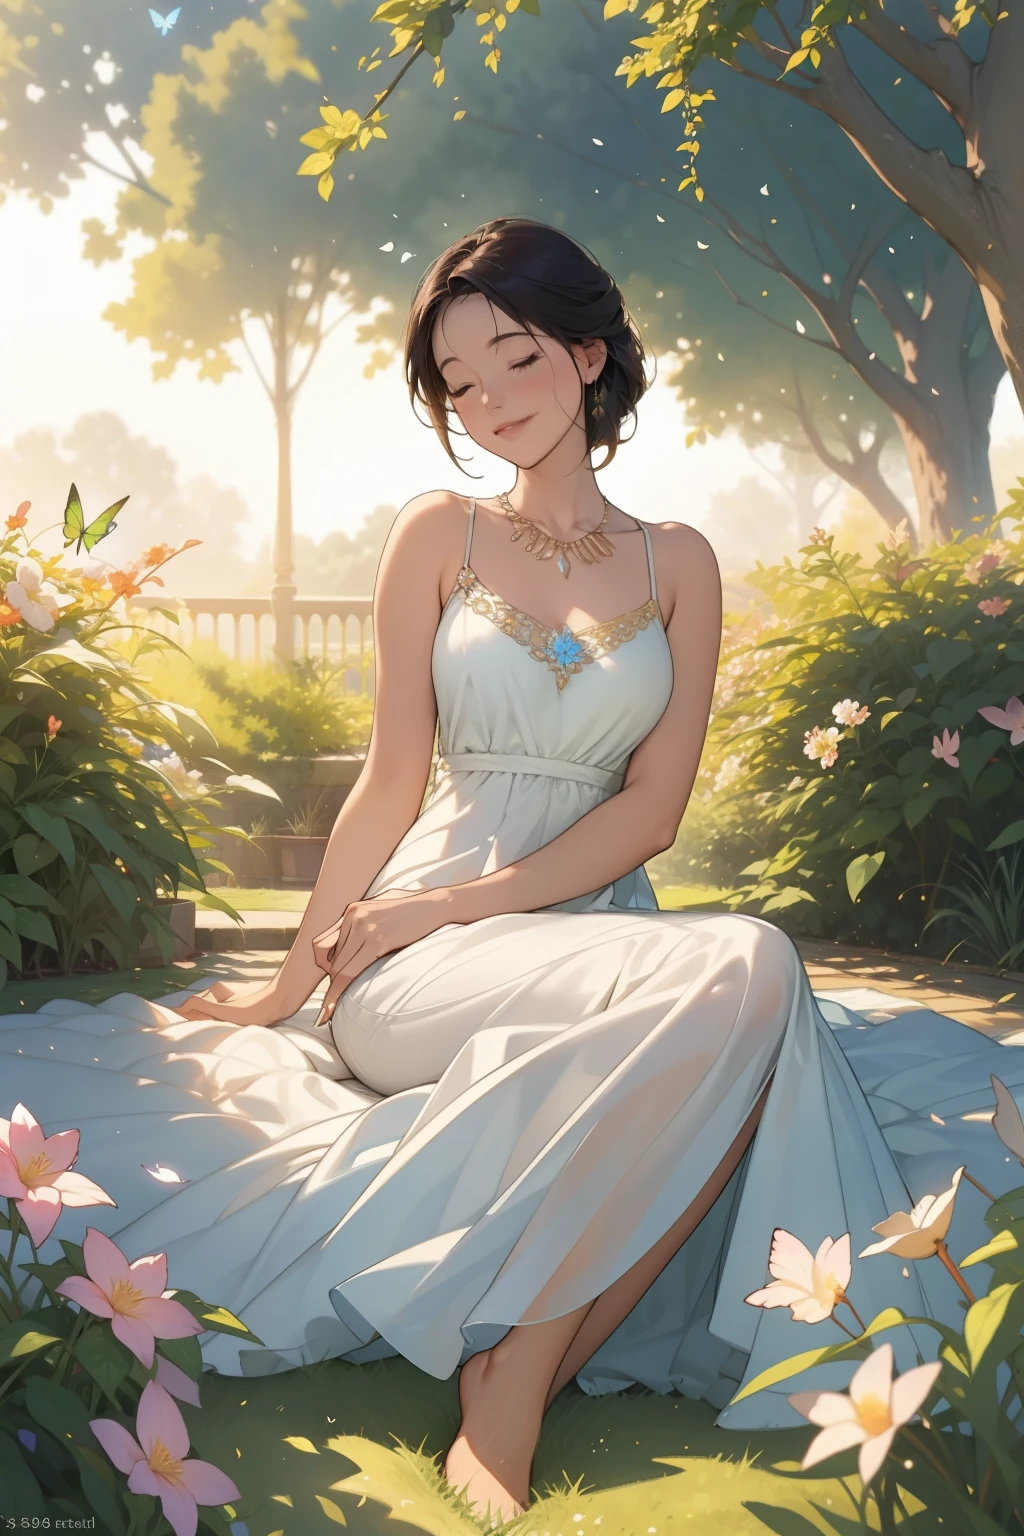 (medium:1.1),oil painting, detailed background, serene atmosphere, vibrant colors, flowing dress, graceful, elegant posture, sunlit garden, blooming flowers, fluttering butterflies, soft brushstrokes, ethereal beauty, delicate features, sparkling eyes, tender smile, golden sunlight, peaceful expression, tranquil setting, warm and inviting ambiance, glowing skin, delicate makeup, shimmering necklace, gentle breeze, dancing leaves, enchanting garden, timeless beauty, captivating gaze, blissful moment, intricate details, subtle shadows, dreamlike quality.